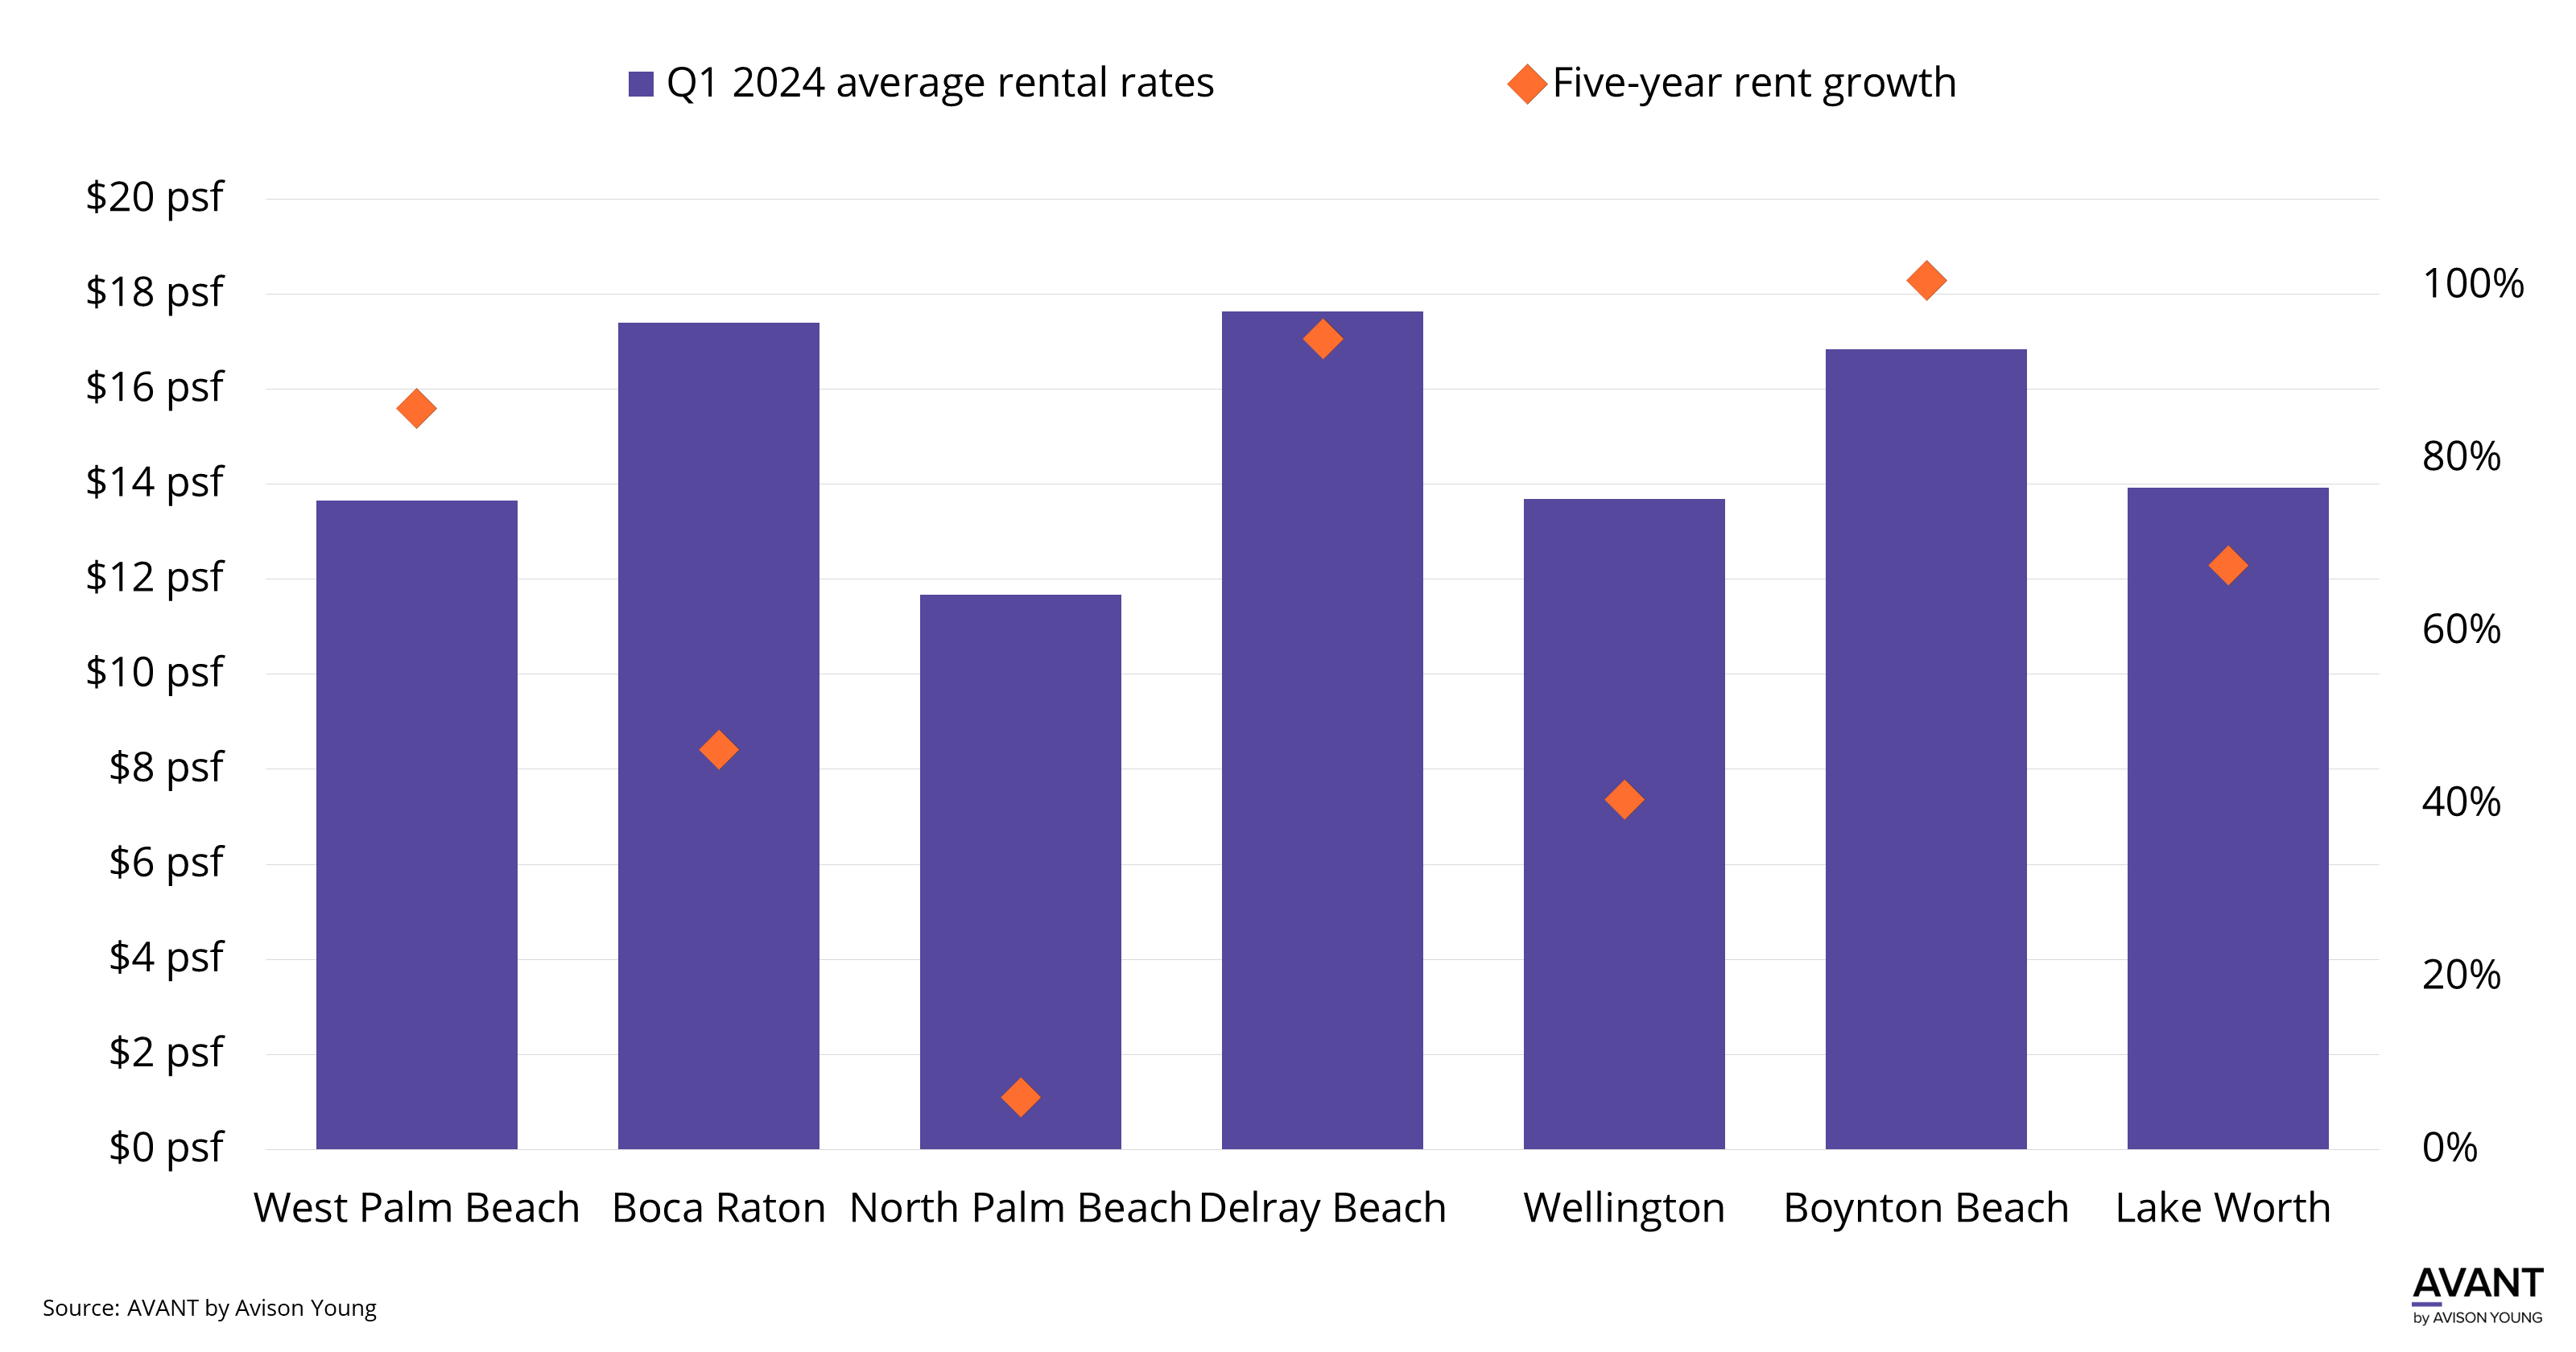 graph of West Palm Beach submarkets' Q1 2024 average rental rates vs five-year rent growth